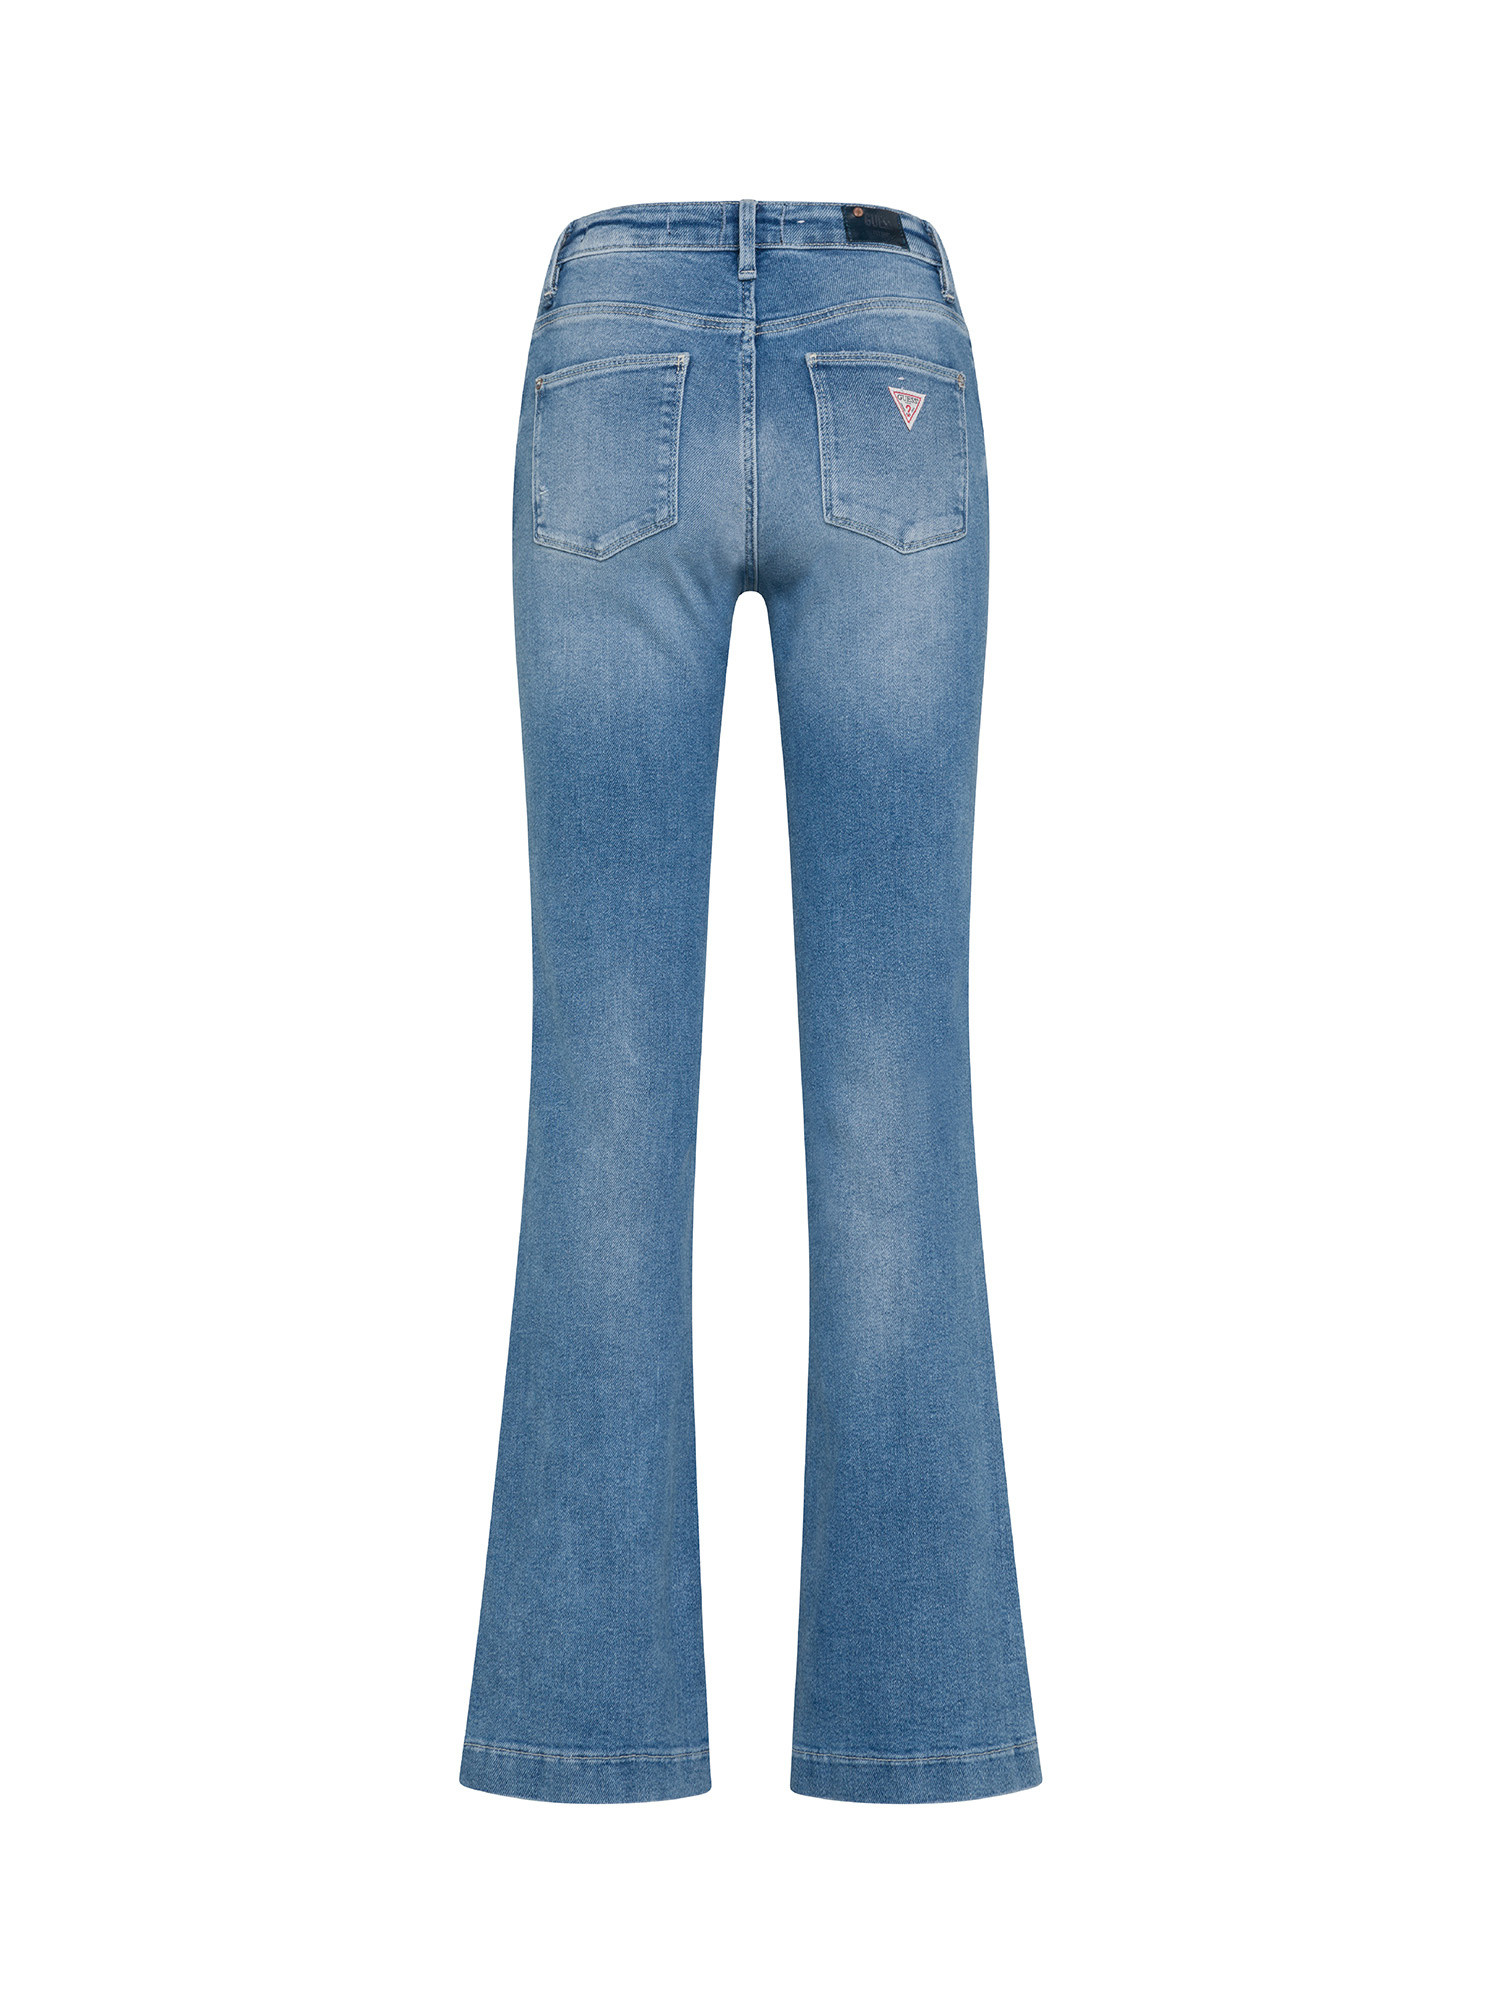 Guess - Jeans 5 tasche bootcut, Denim, large image number 1